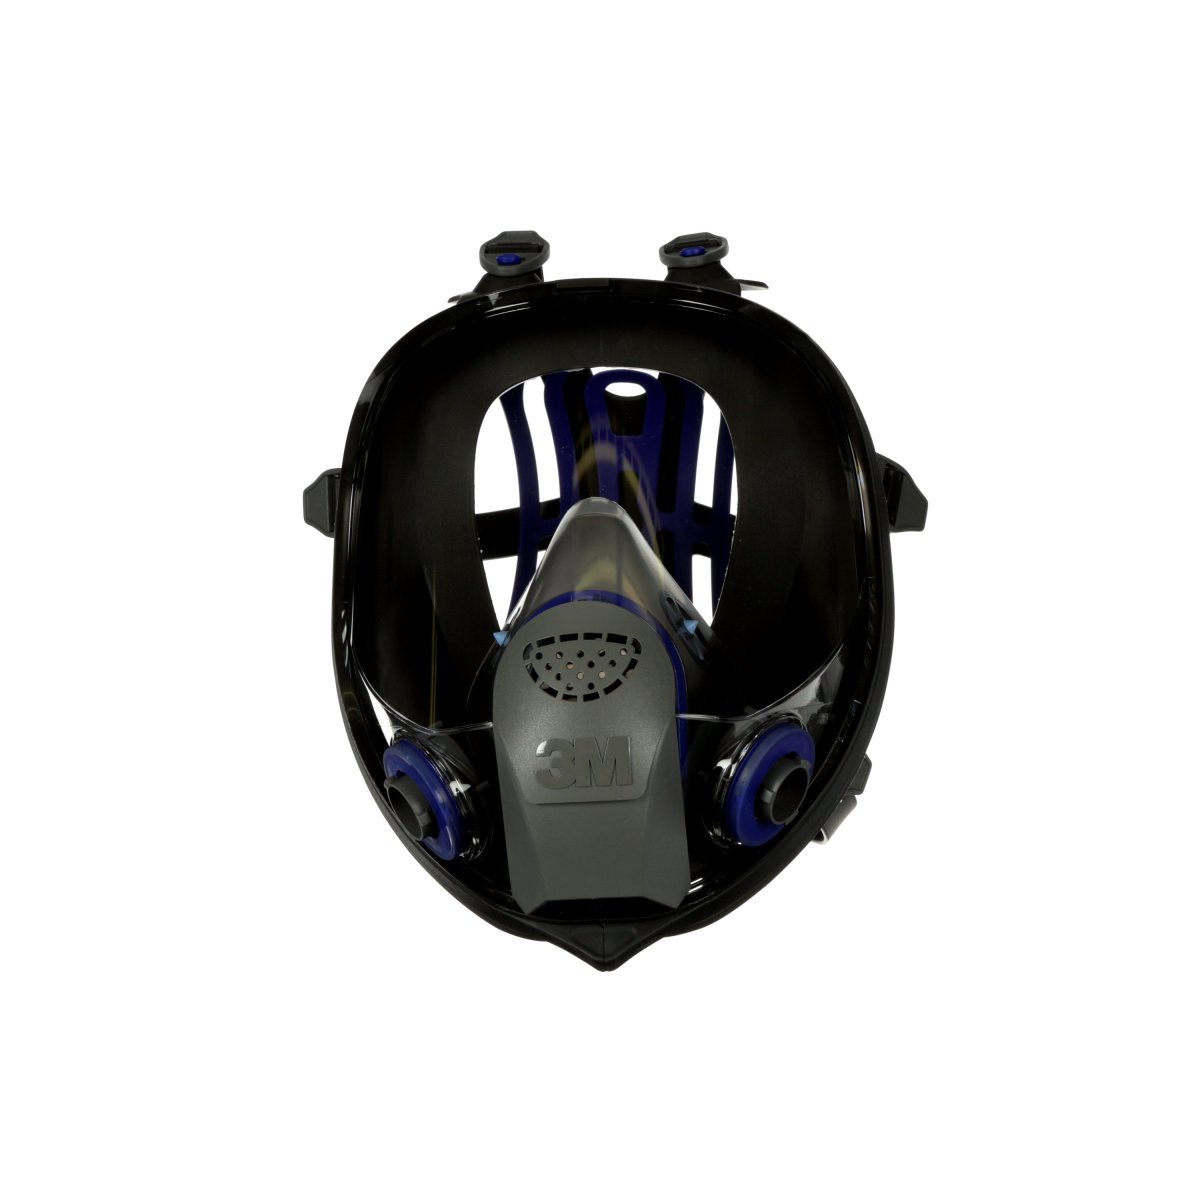 3M™ Small FF-401 Series Full Face Ultimate FX Air Purifying Respirator With 6 Point Harness (Availability restrictions apply.)